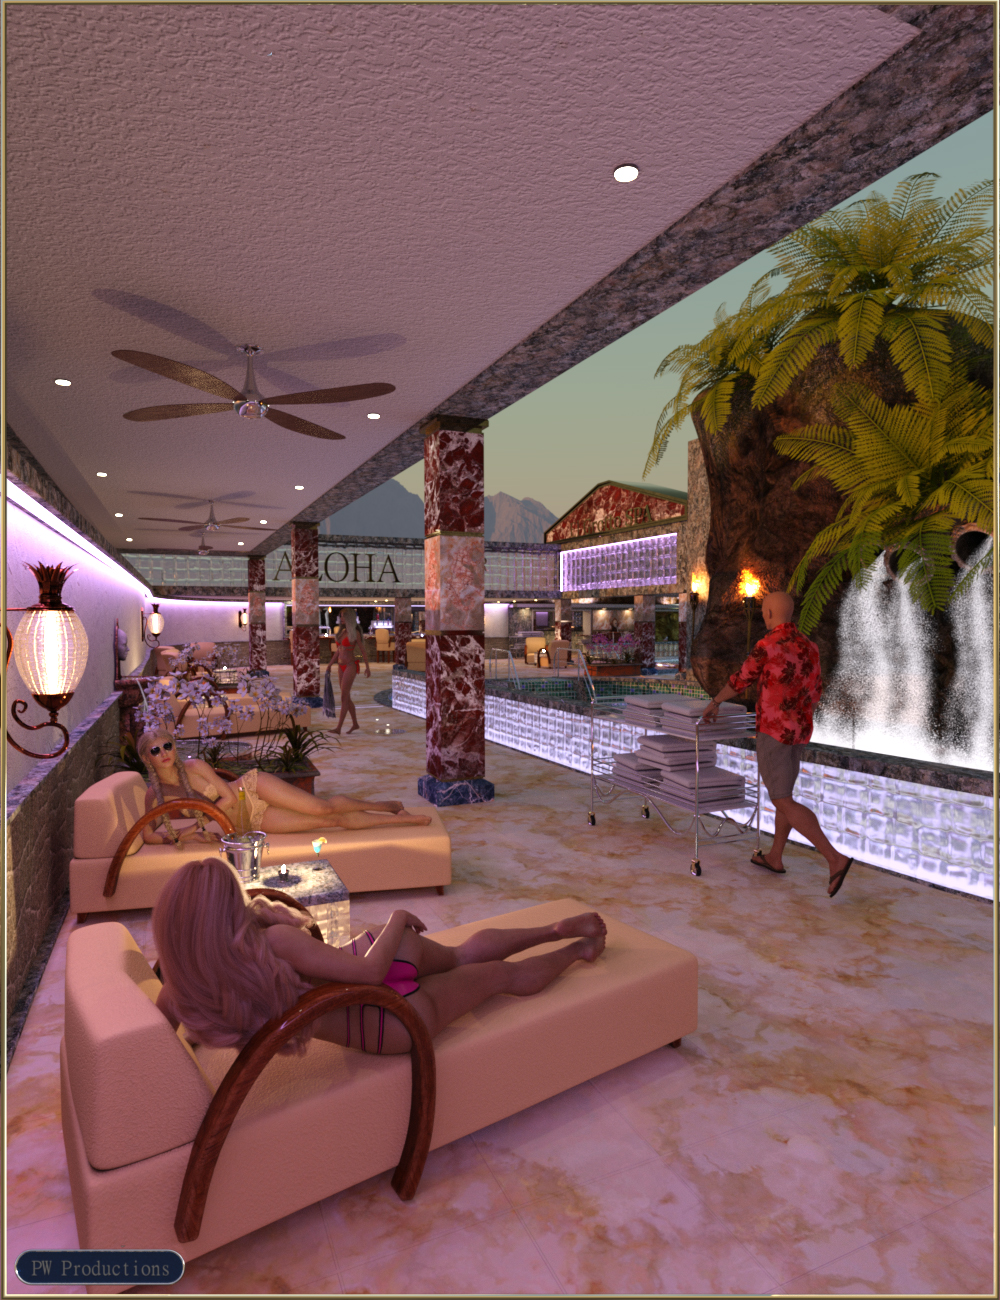 PW El Grotto Spa by: PW Productions, 3D Models by Daz 3D